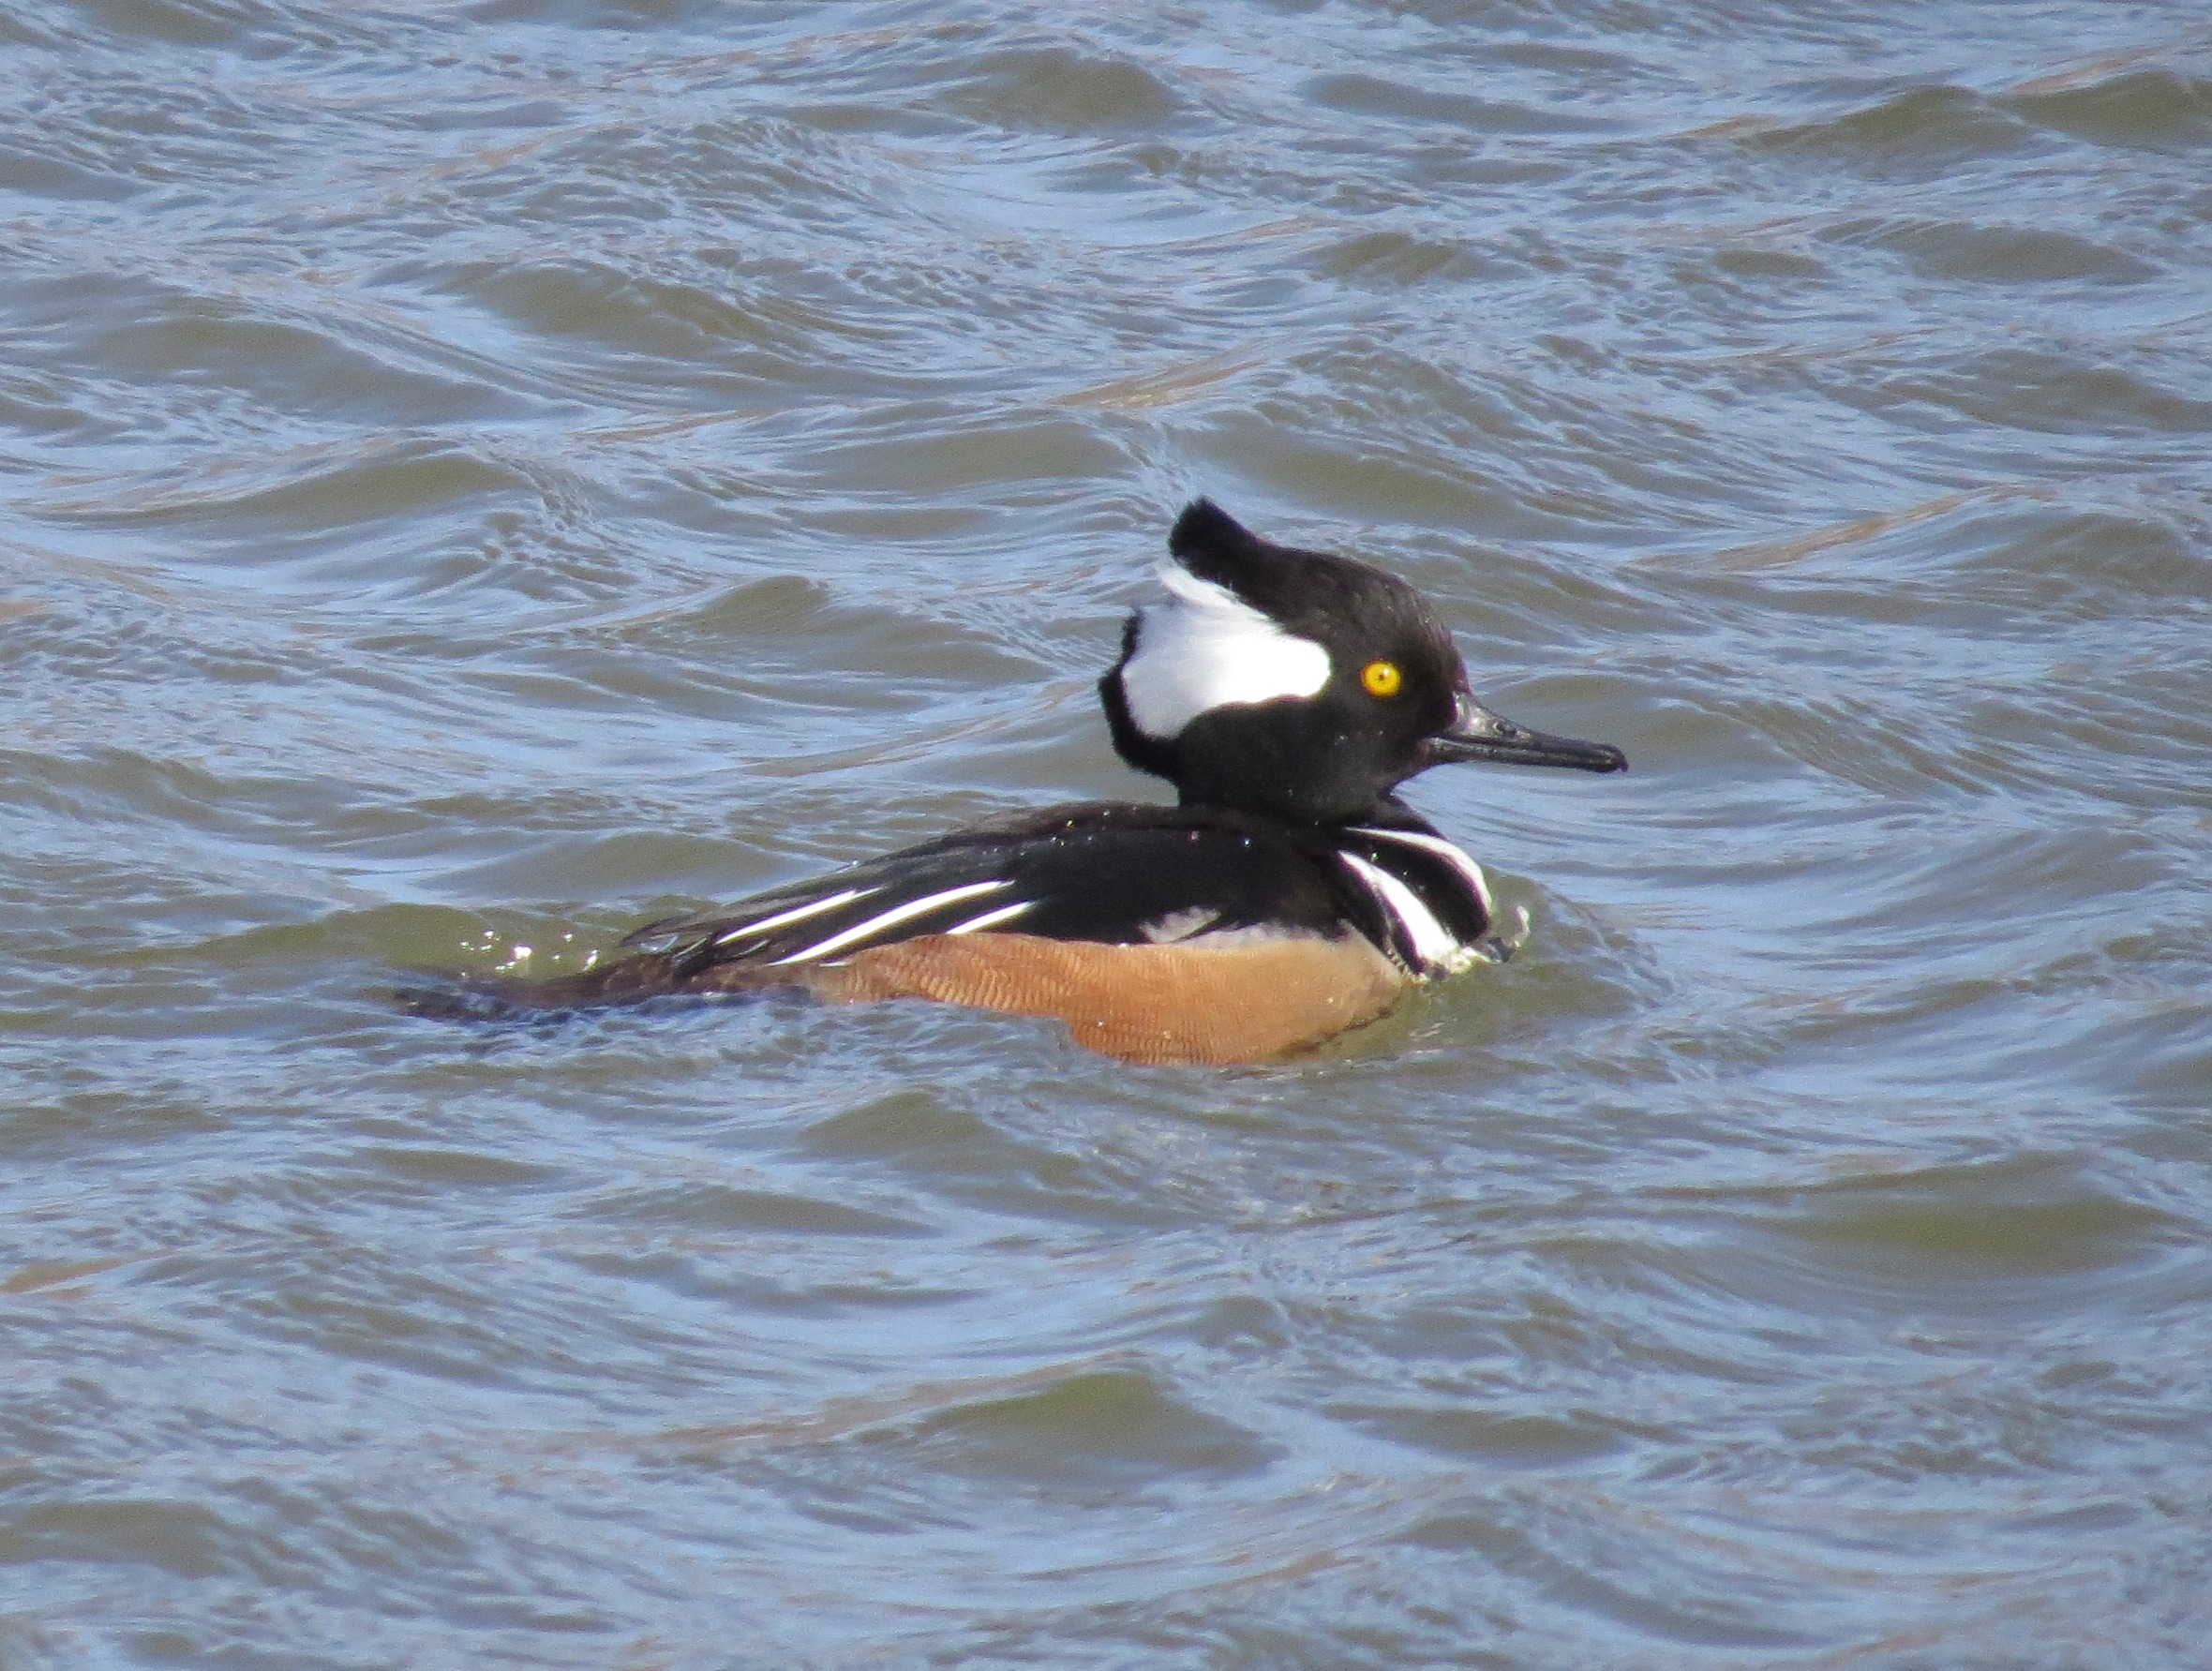 Hooded Merganser, photo by Fred Shaffer. Schoolhouse Pond, February 5, 2015. Used by permission of photographer.